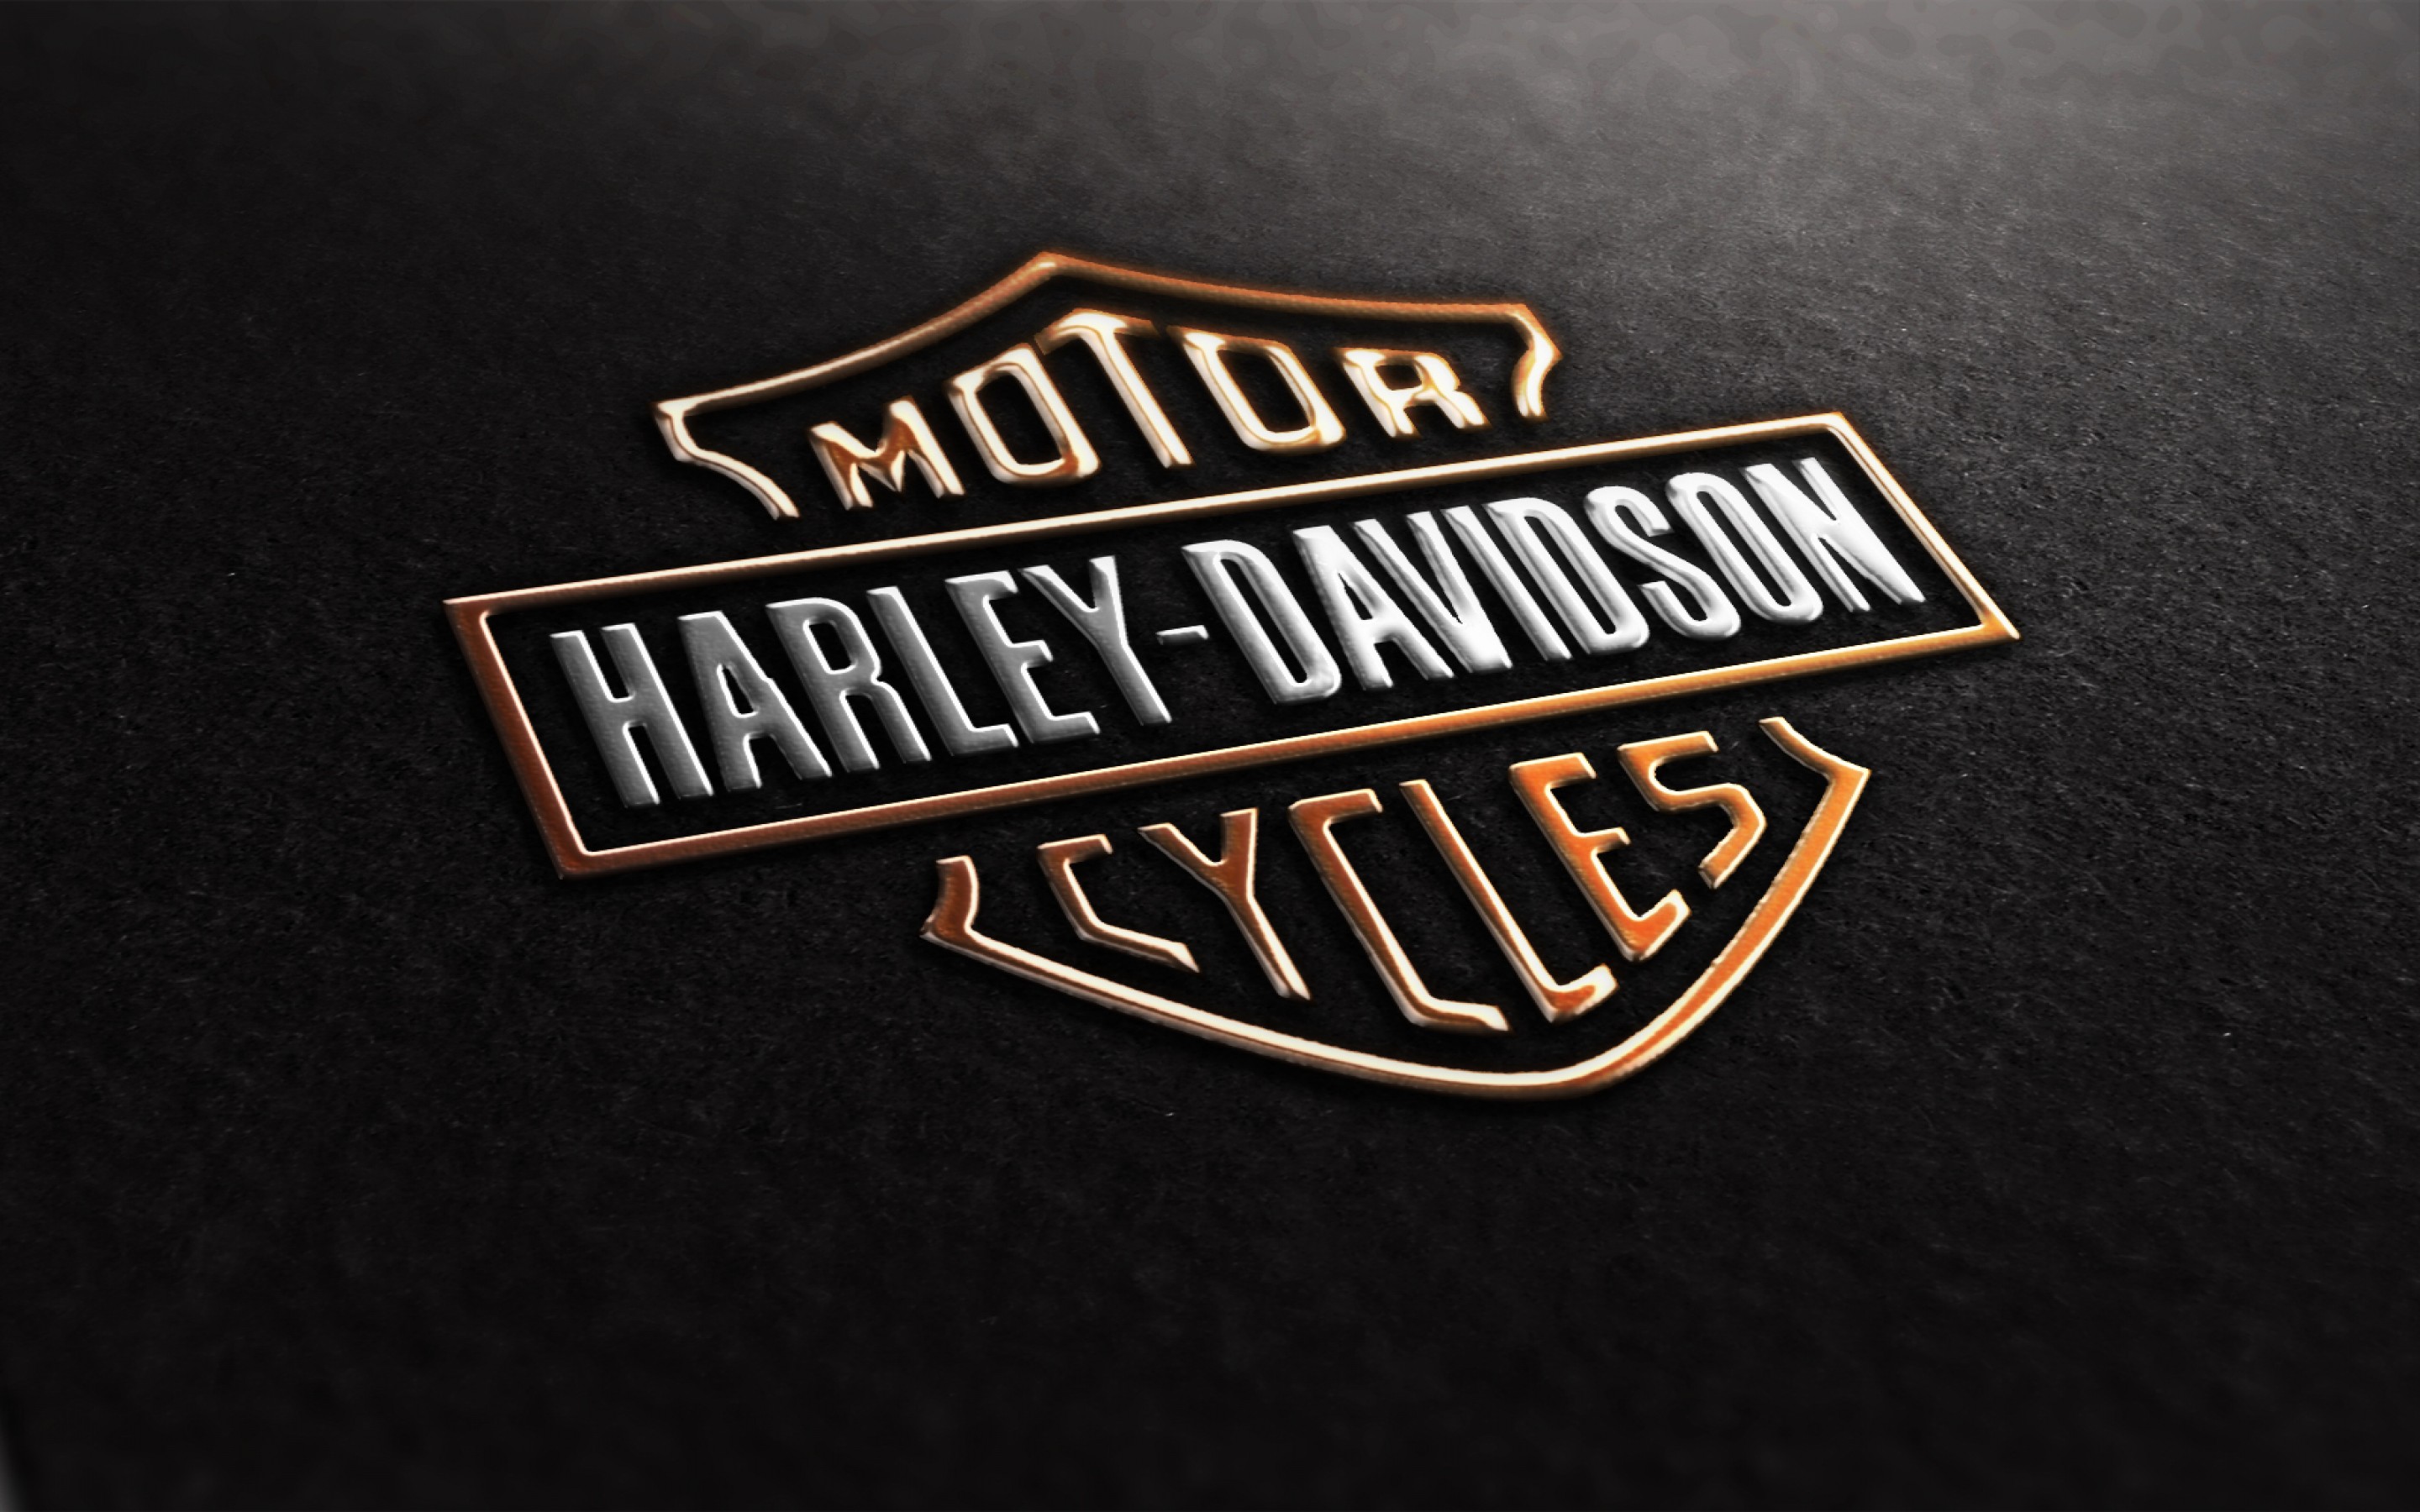 File Name Harley Davidson New Wallpaper Pictures To Pin